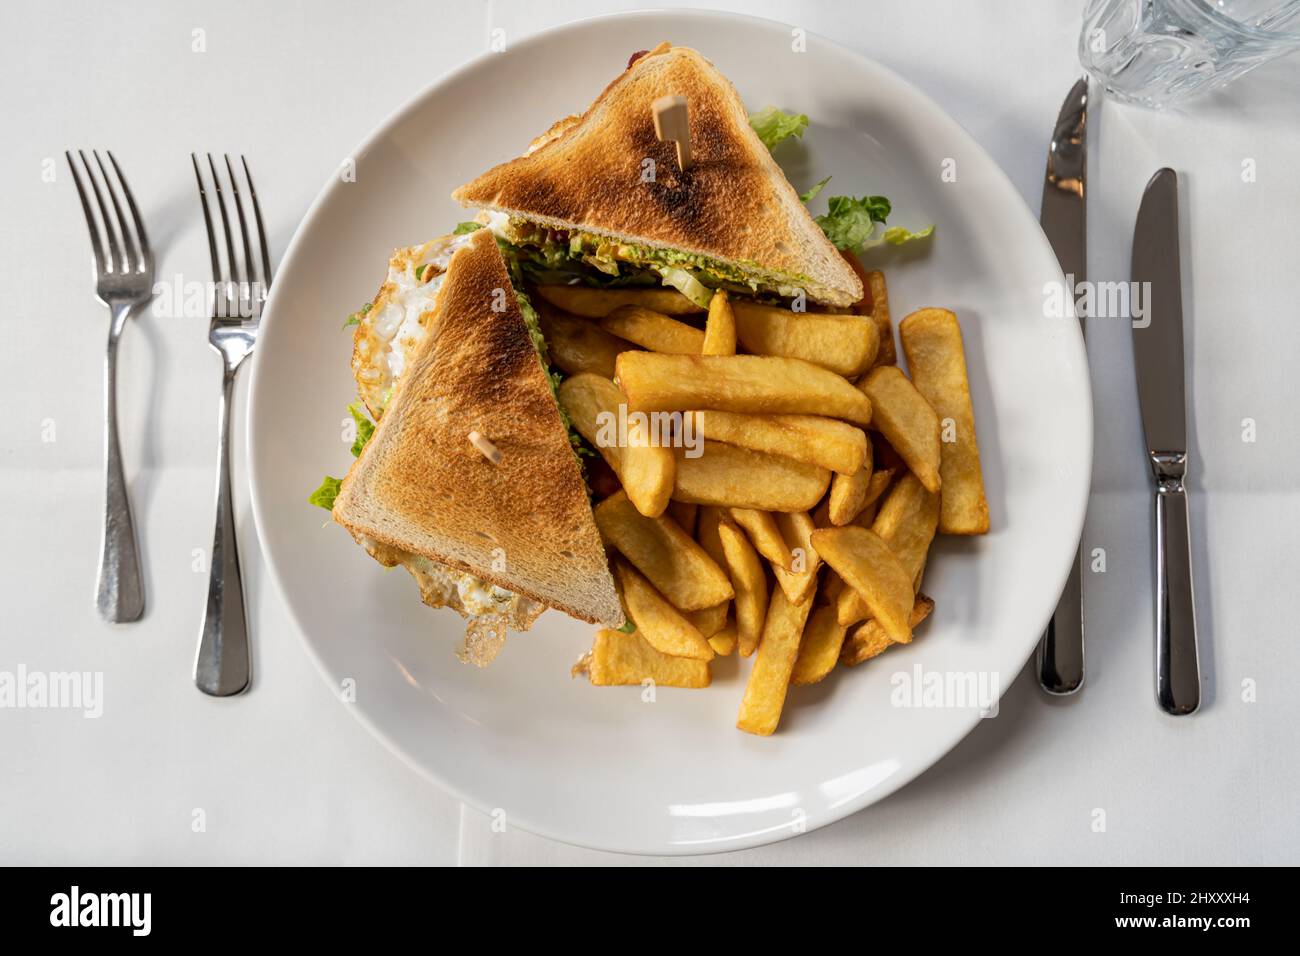 Top view of sandwiches and fries on a white plate with utensils Stock Photo  - Alamy